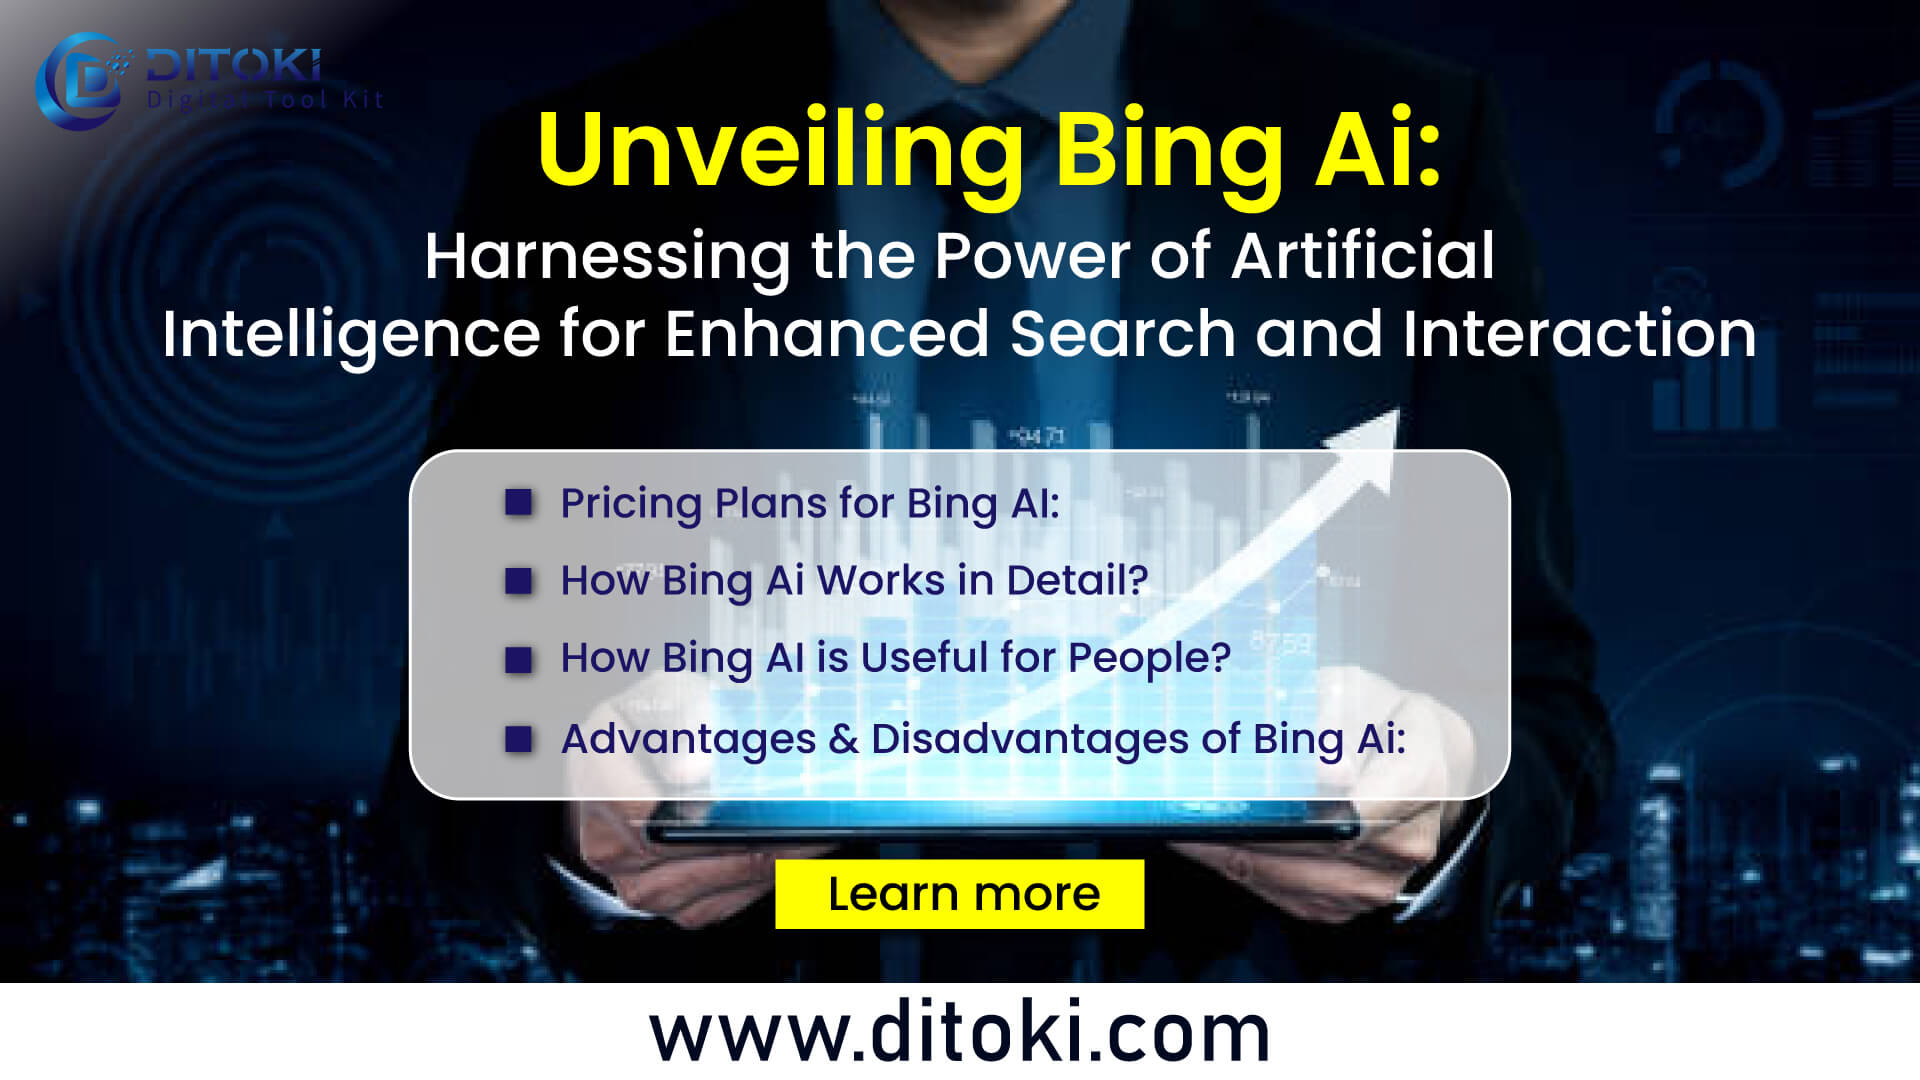 Unveiling Bing AI: Harnessing the Power of Artificial Intelligence for Enhanced Search and Interaction